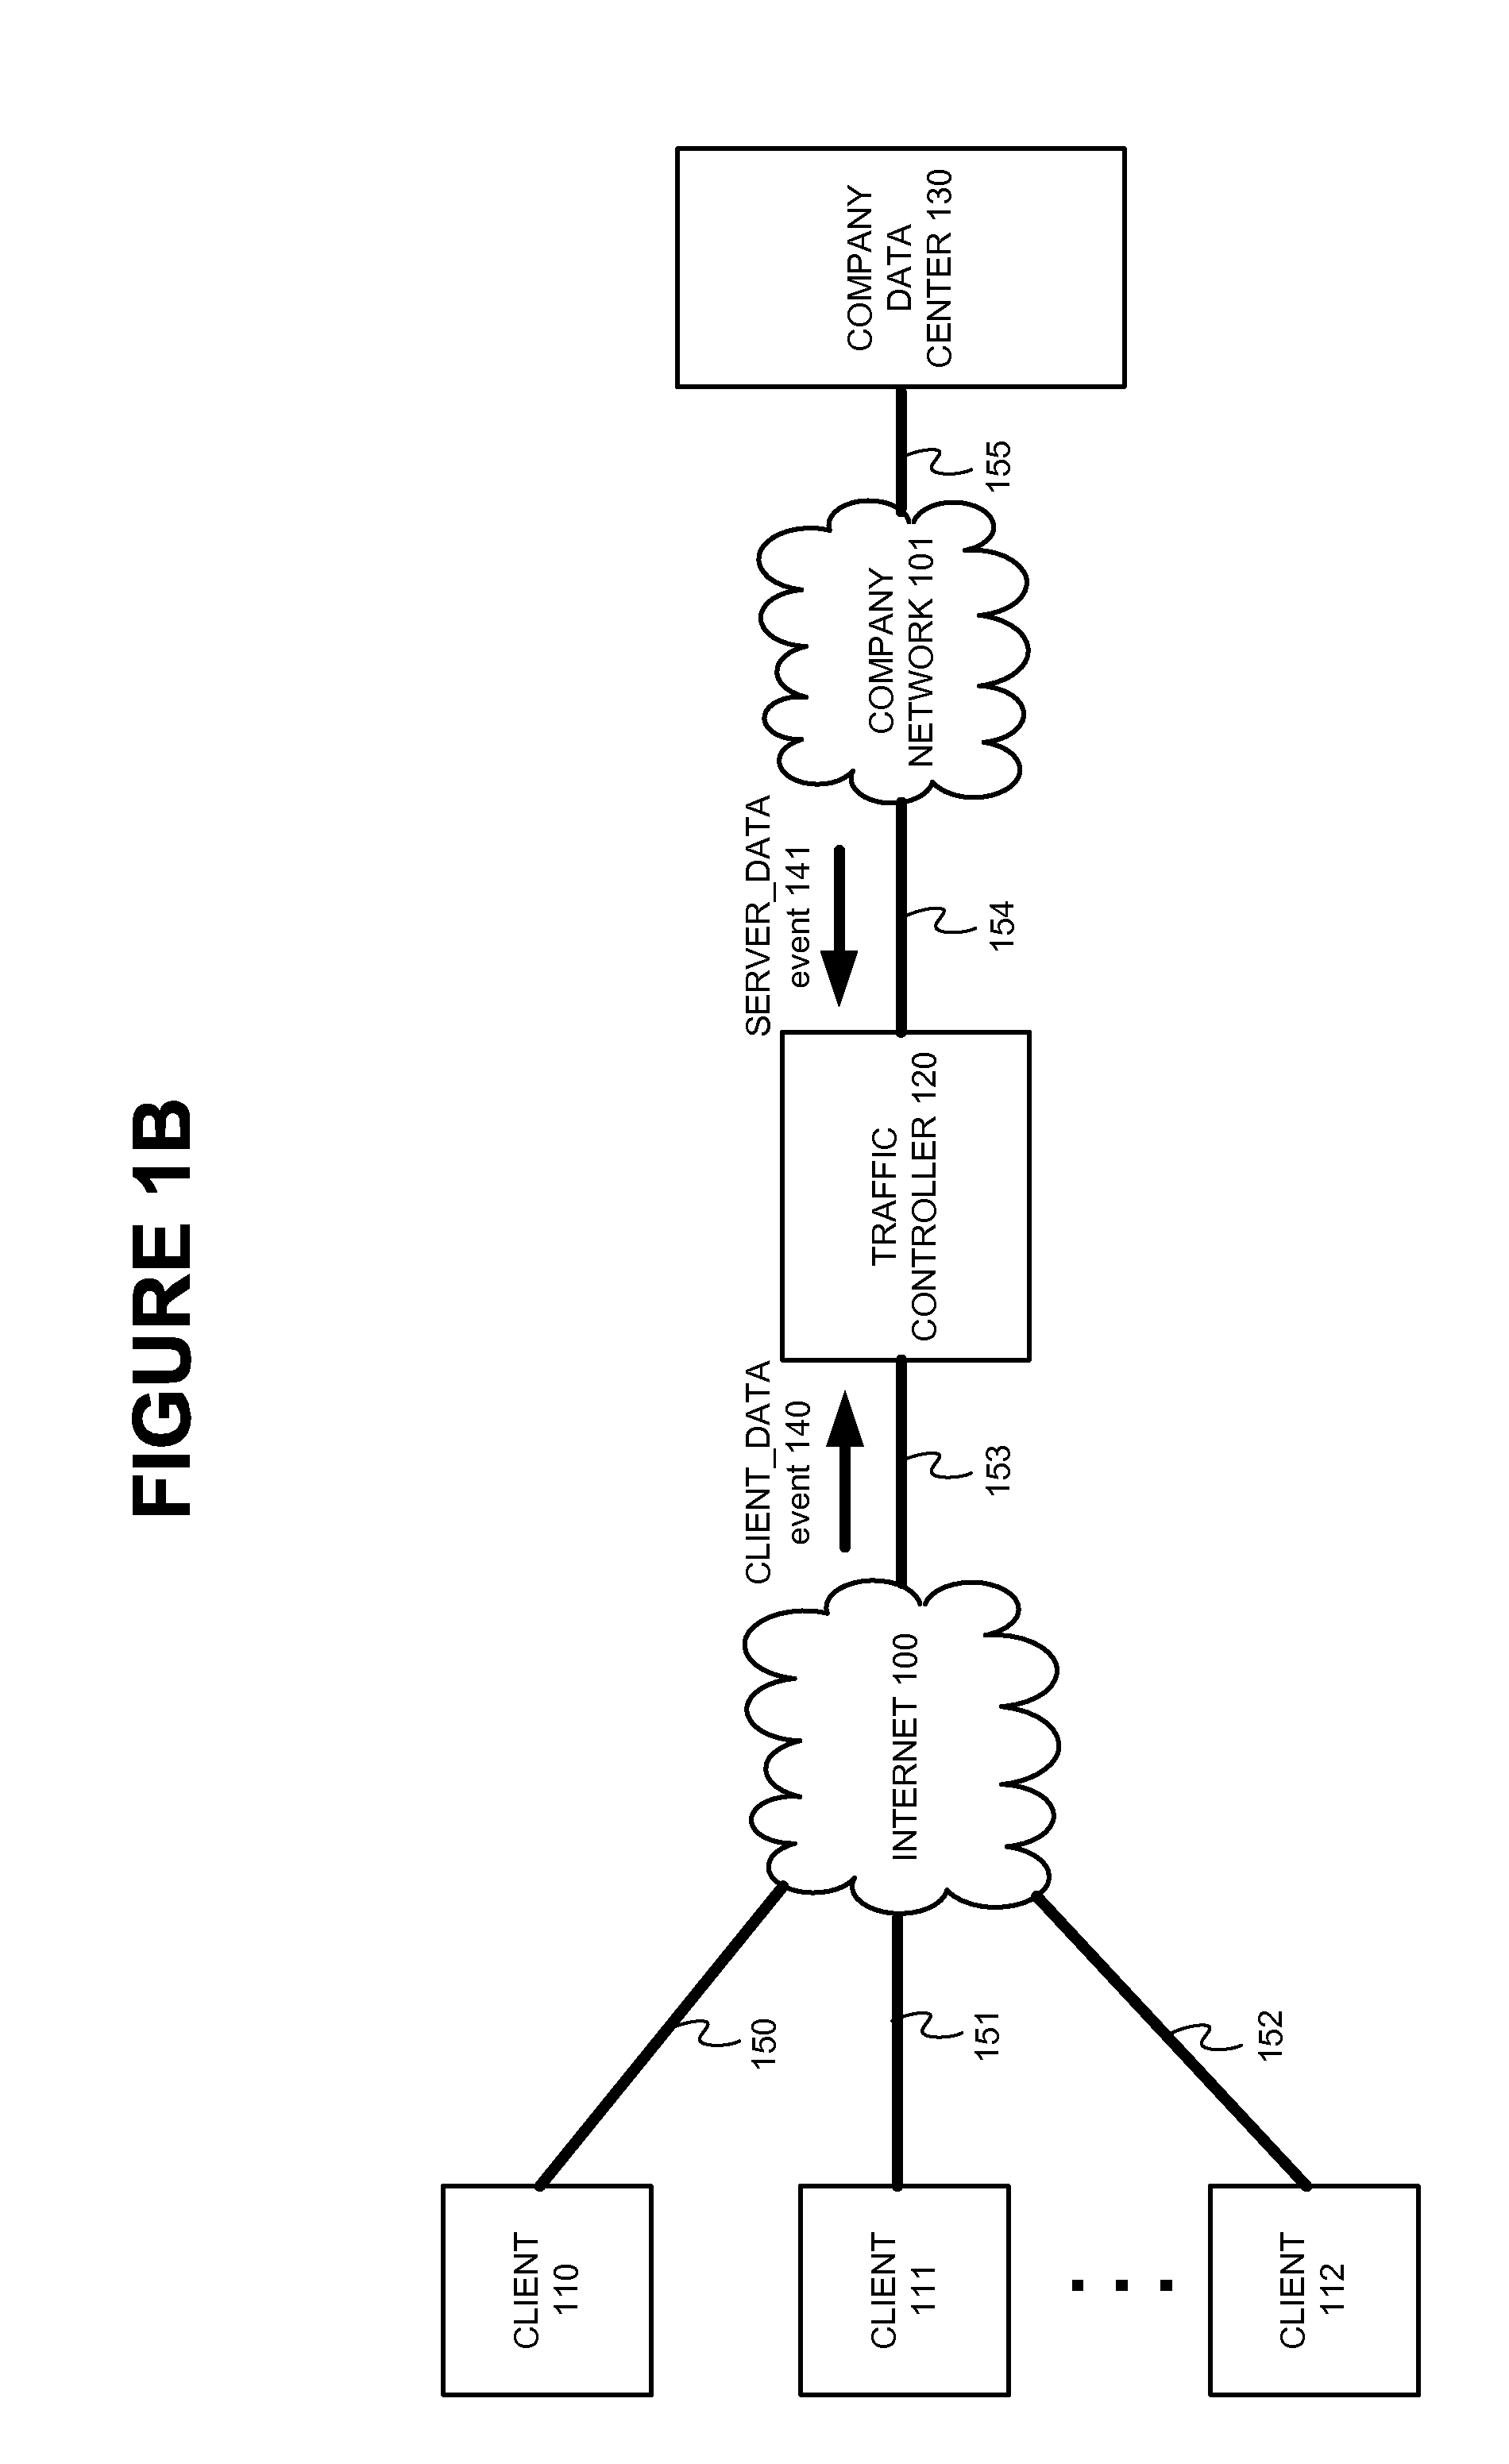 System and Method for Customizing the Identification of Application or Content Type